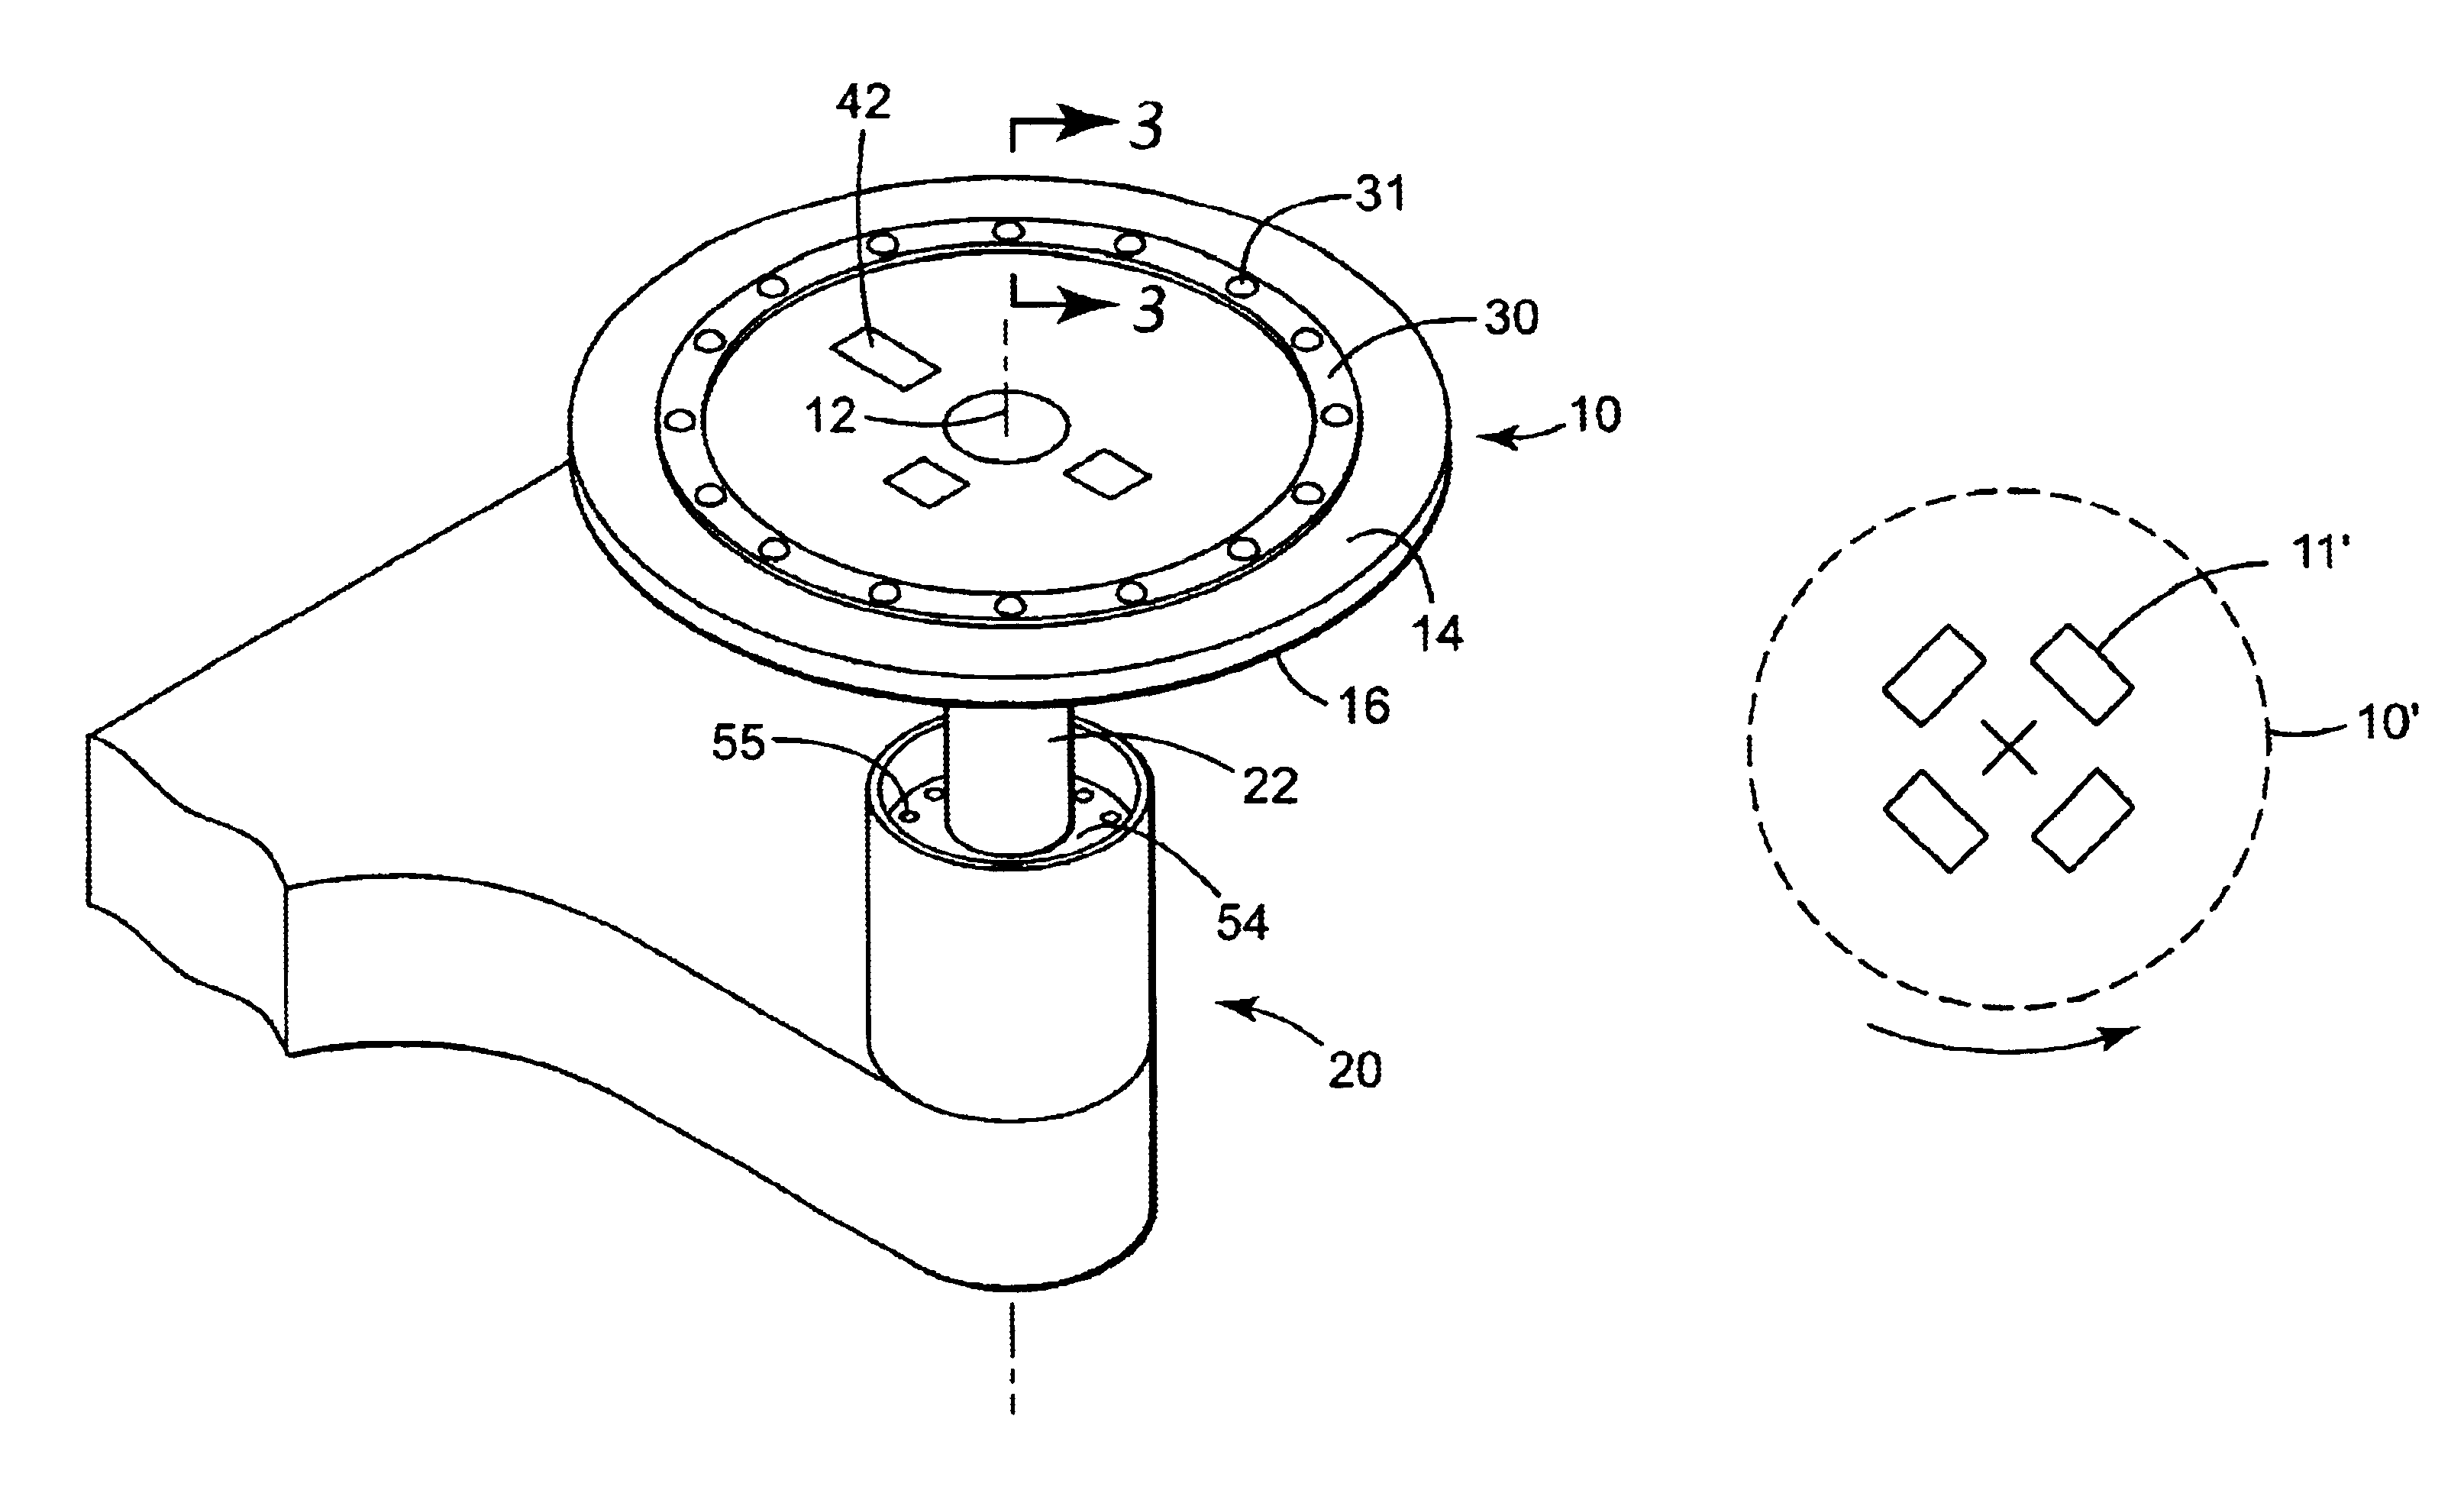 Modular systems and methods for using sample processing devices